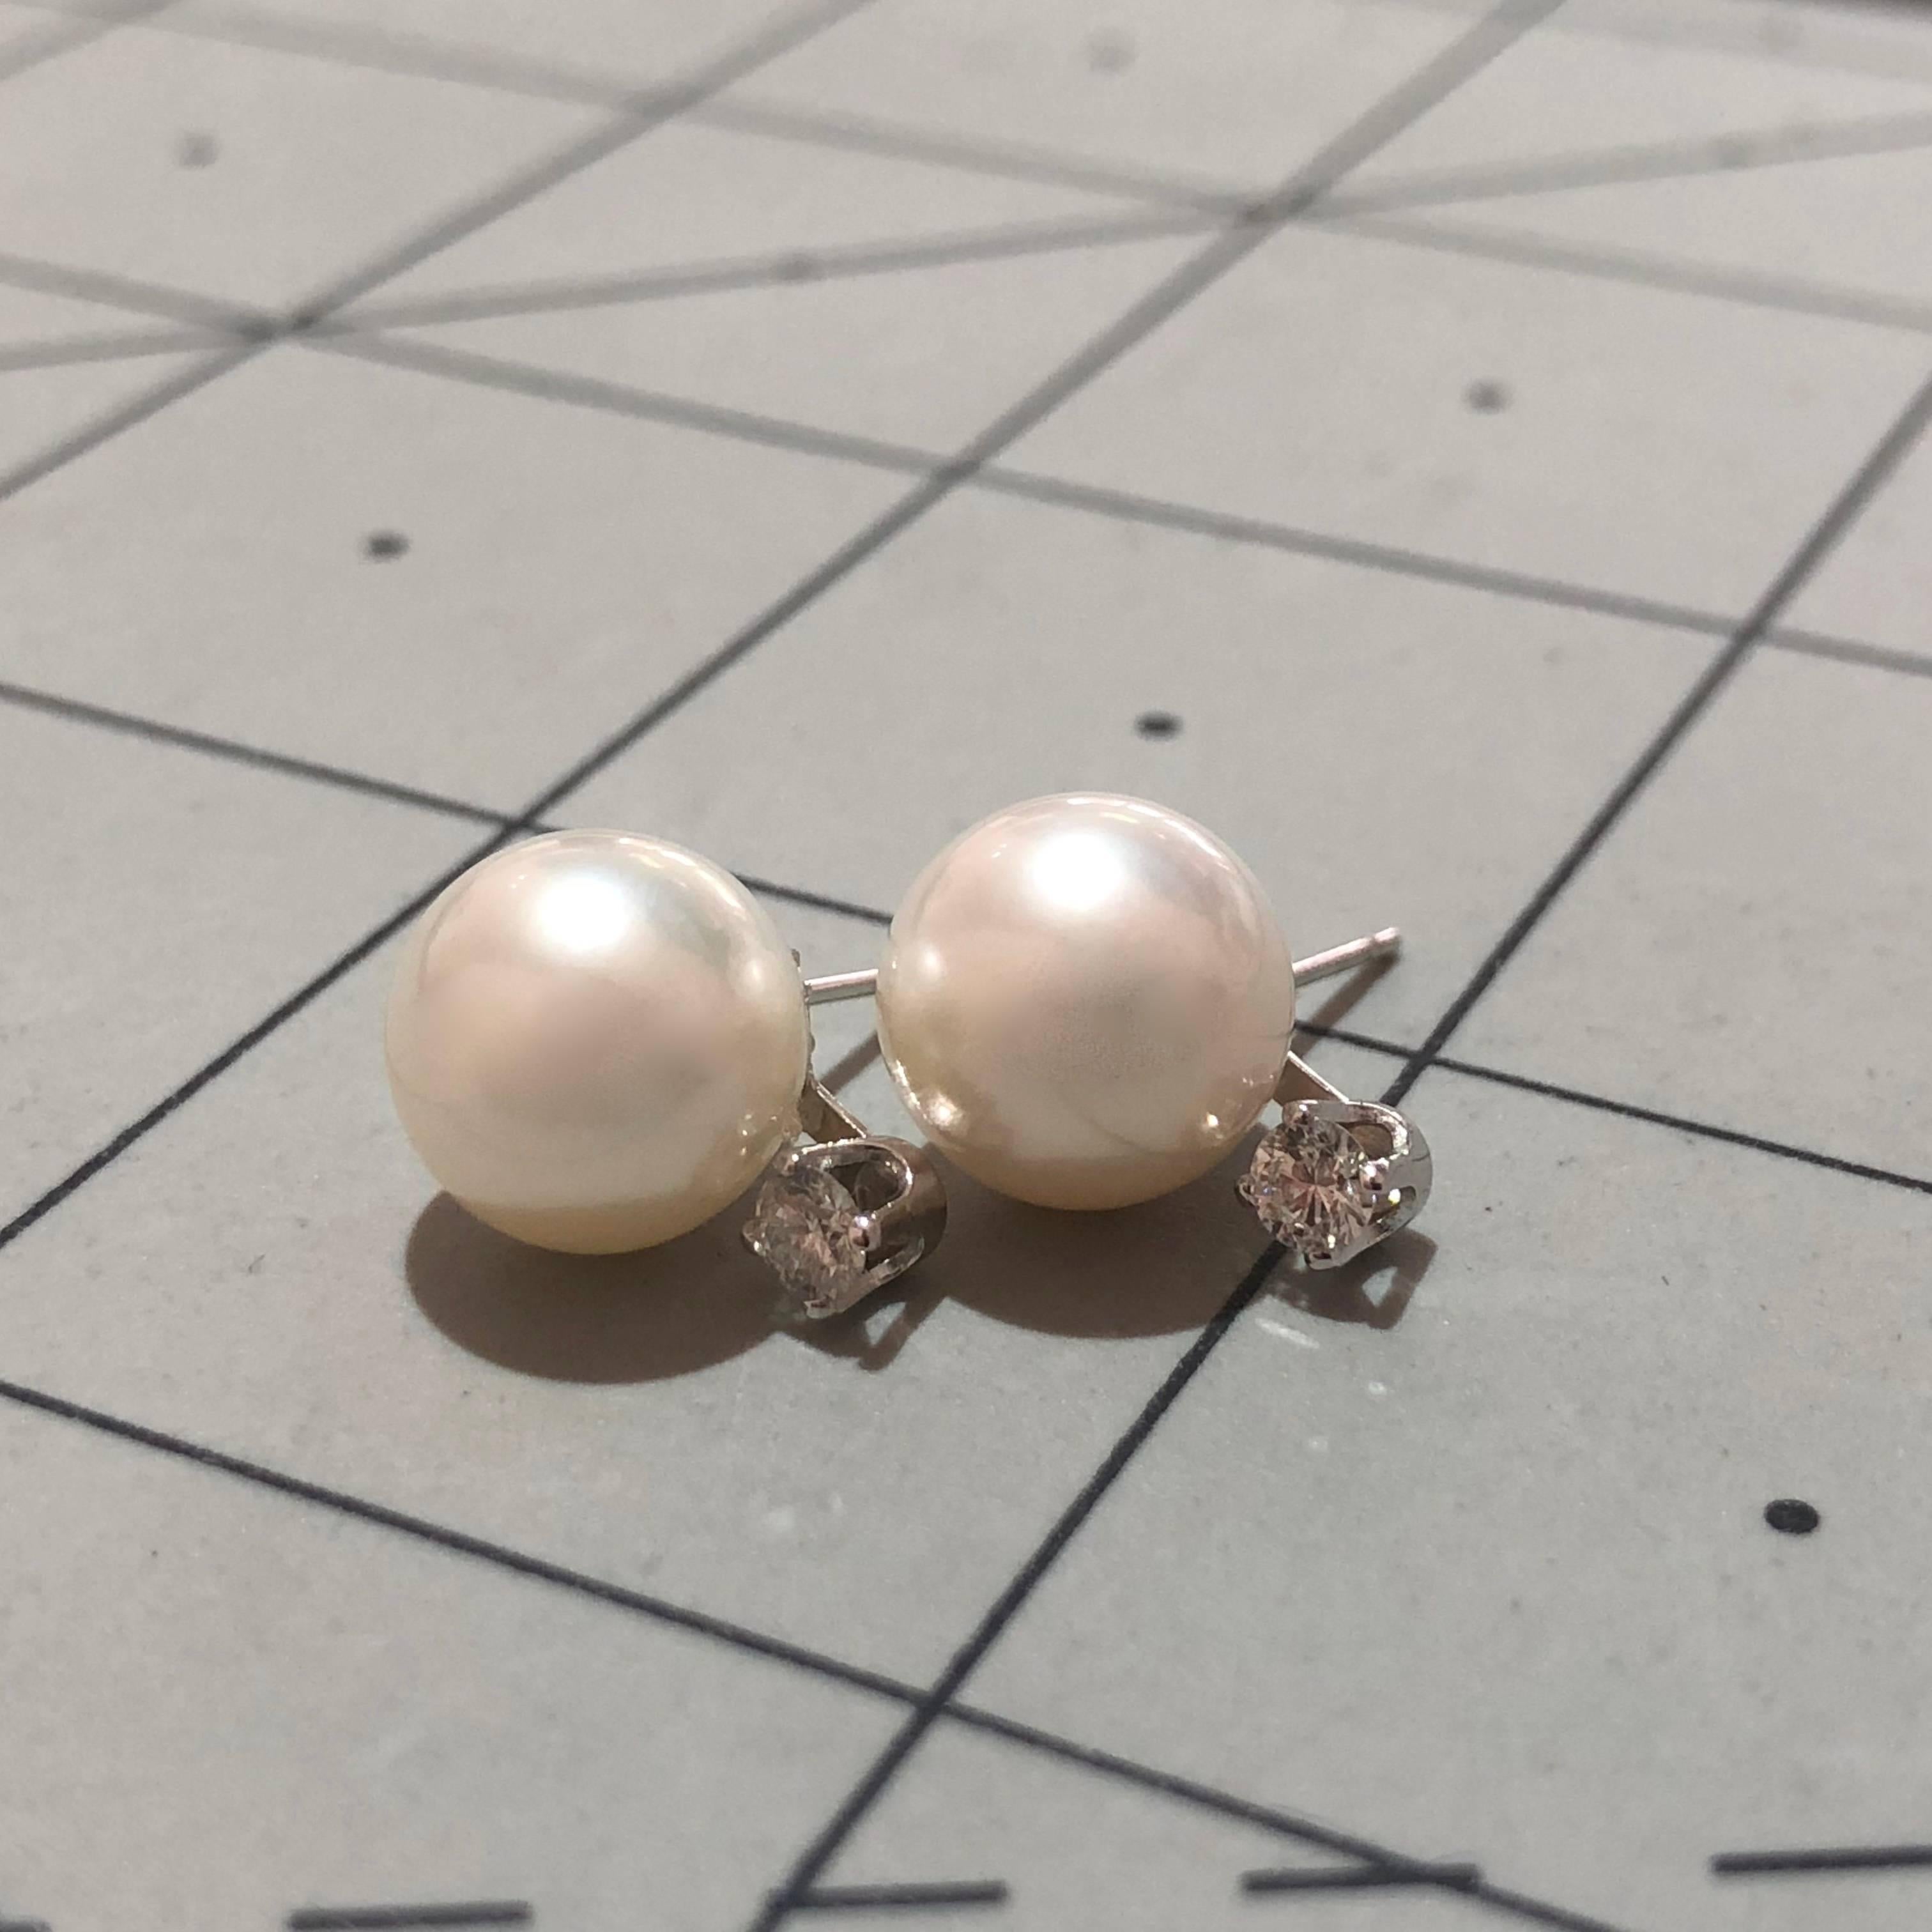 14 Karat White Gold Earrings with Fresh Water Pearls and 0.20 Carat of Diamond For Sale 1